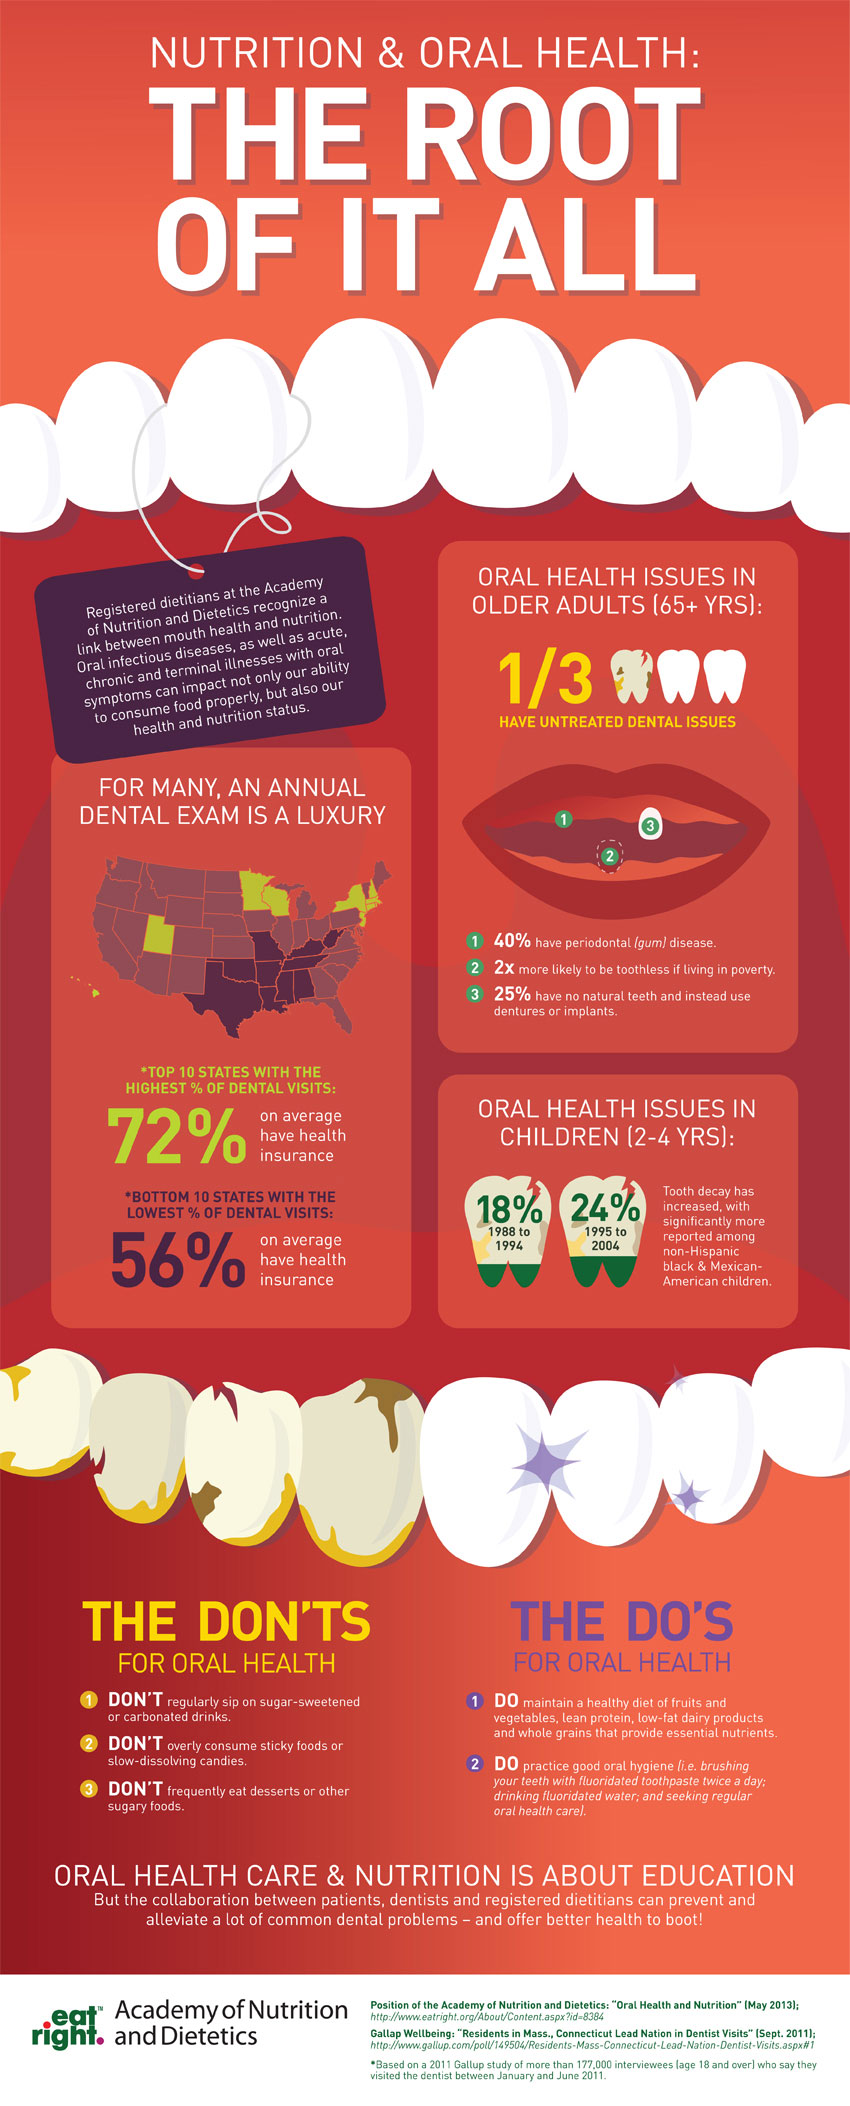 NUTRITION AND ORAL HEALTH